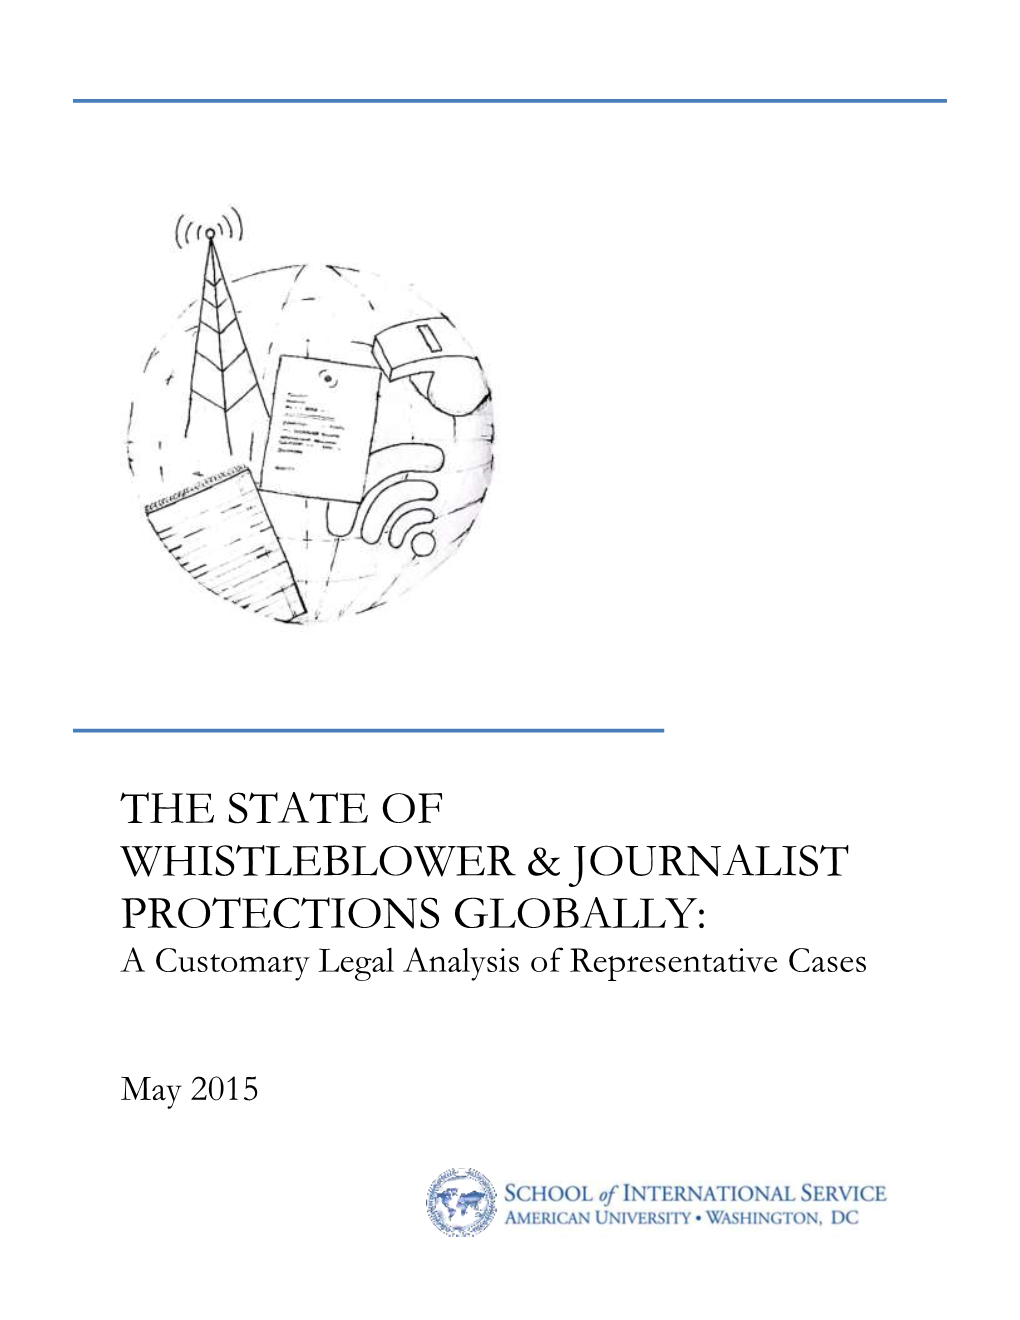 The State of Whistleblower & Journalist Protections